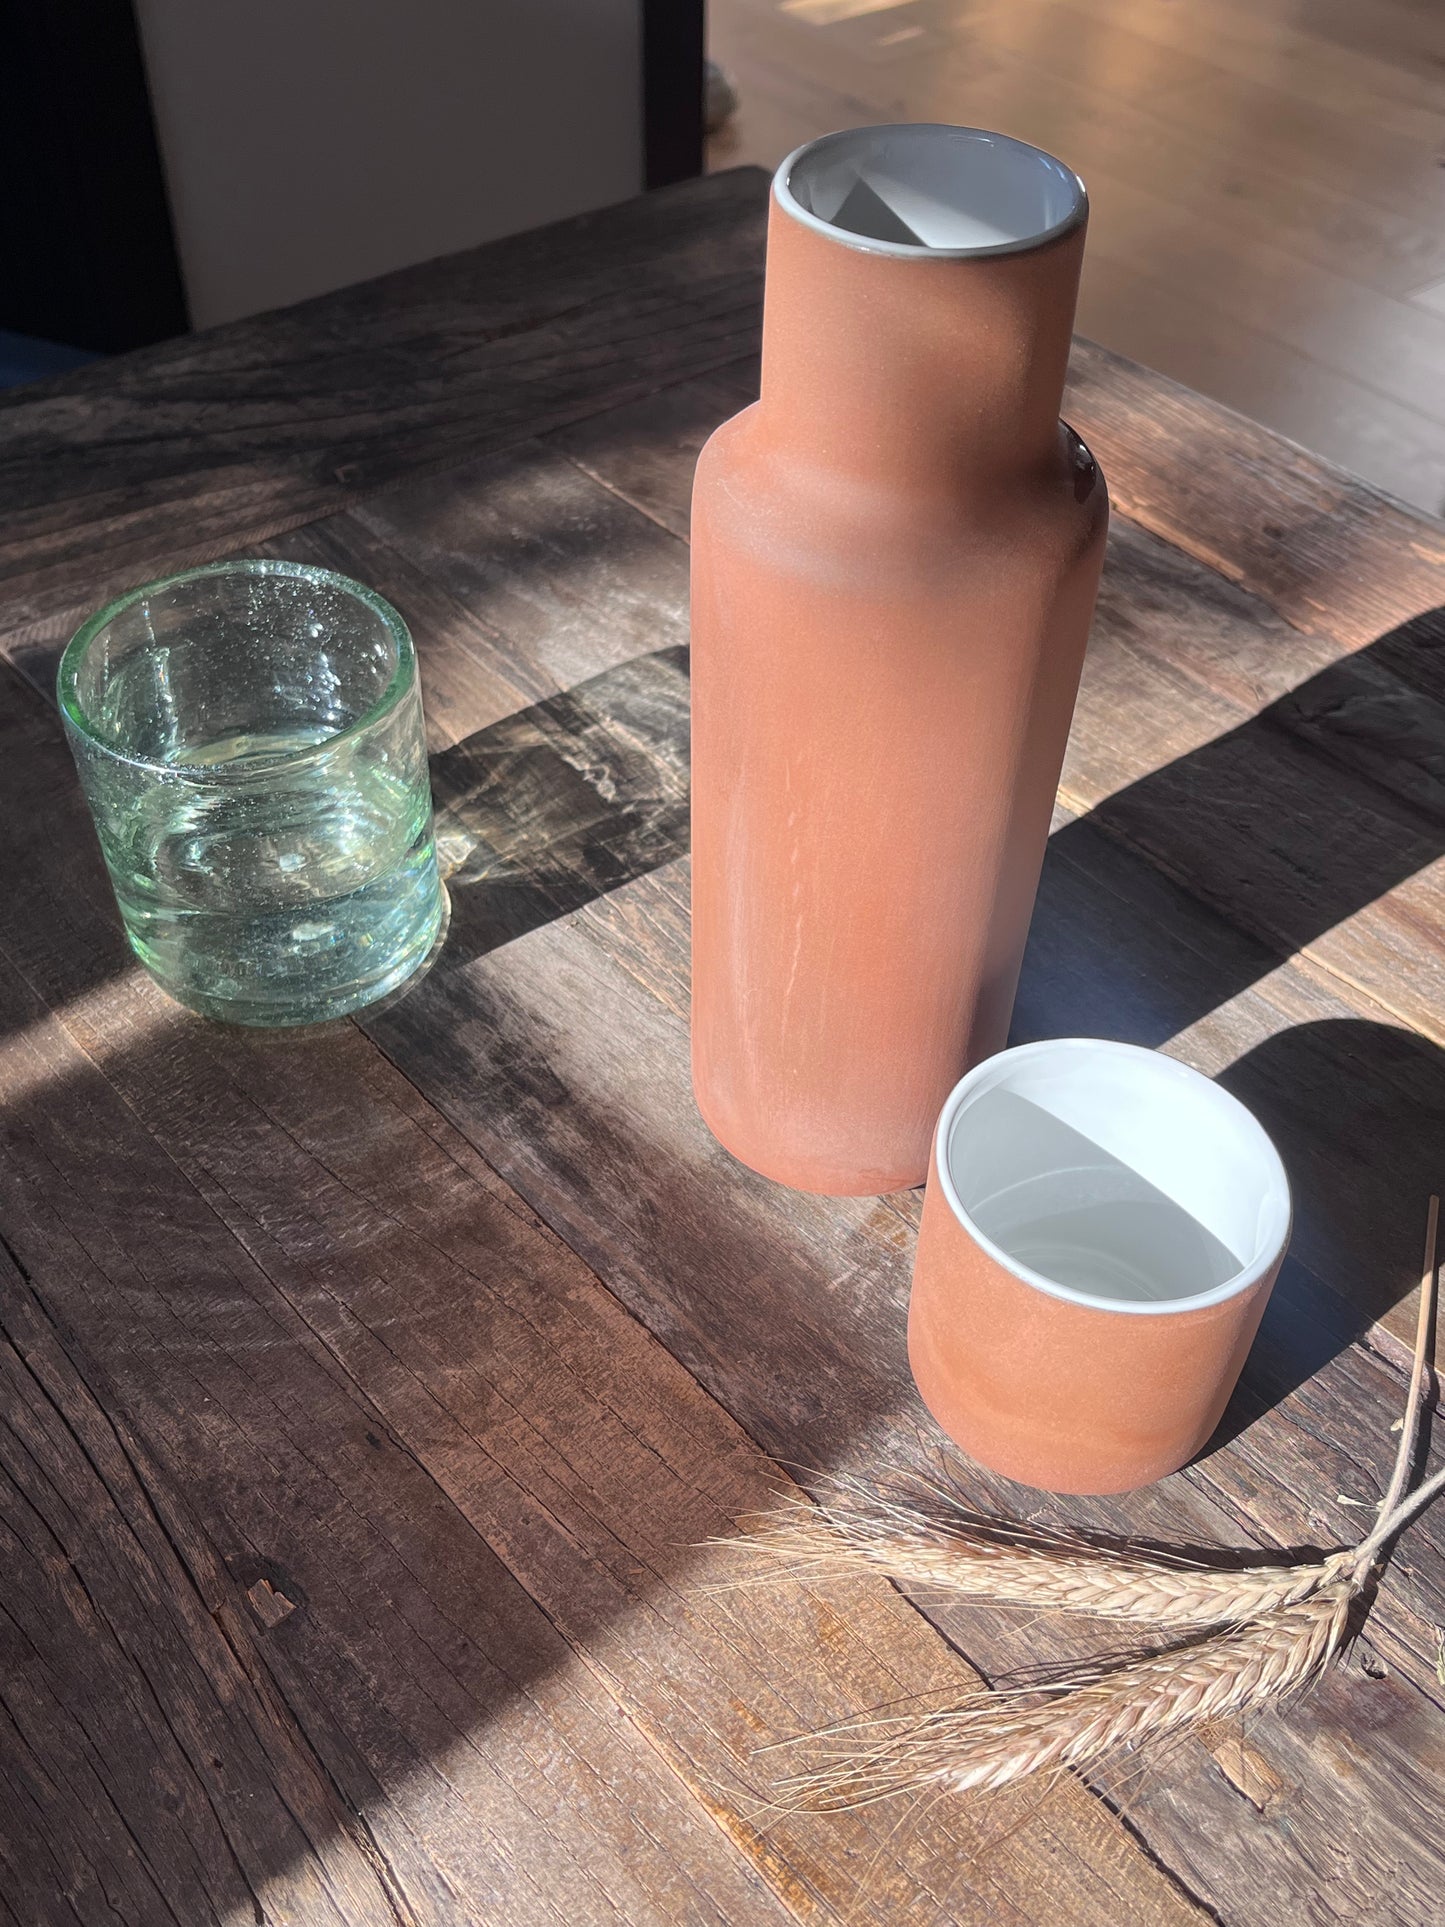 Stoneware; high-fire clay tableware carafe with ceramic cup. When not in use, handmade ceramic cup can be flipped over and fits as the carafe top. Handmade by artisans in Mexico.